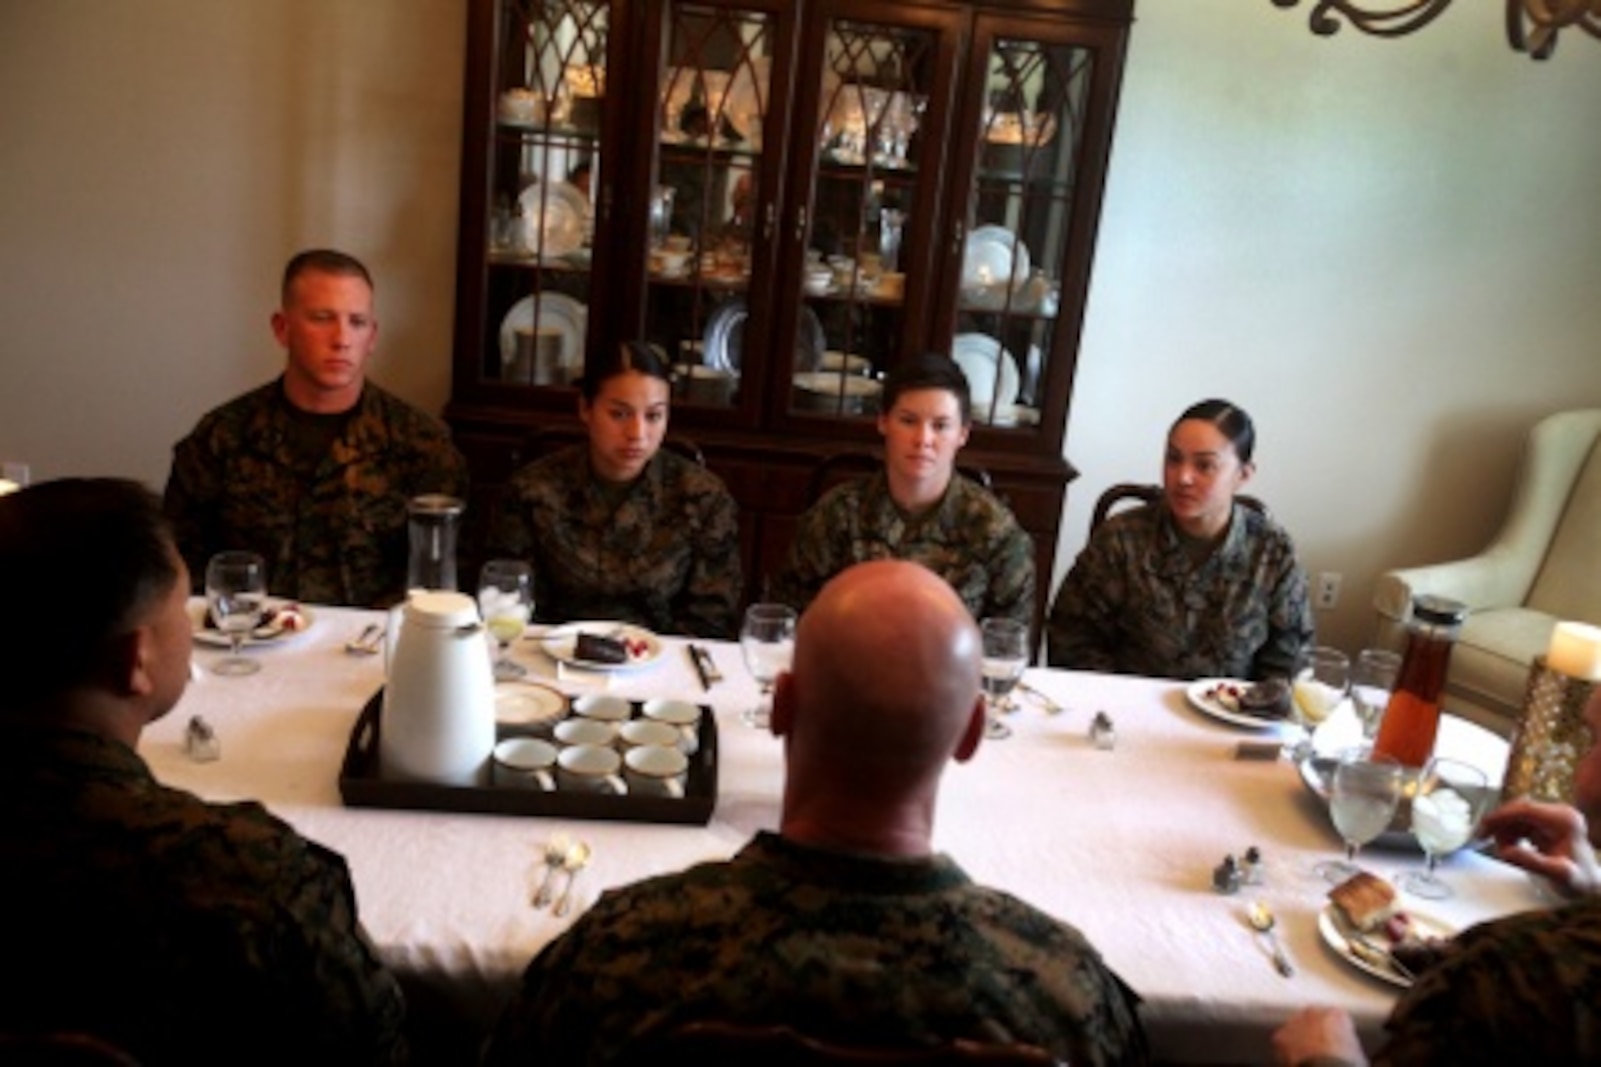 Brigadier Gen. David A. Ottignon, the 1st Marine Logistics Group commanding general, Master Chief Petty Officer Harlan B. Patawaran, the command master chief of 1st MLG, and Sgt. Maj. Troy E. Black, the sergeant major of 1st MLG, share lunch with meritoriously promoted sergeants aboard Camp Pendleton, Calif., Feb. 23, 2016. The gathering served as an ideal opportunity for the four meritoriously promoted sergeants to draw on the leaders’ knowledge and experience through discussions of leadership, work ethic, family life, and what it means to be a sergeant of Marines. The four Marines promoted included Sgt. Casey Primeaux, a combat engineer with 7th Engineer Support Battalion, Sgt. Nadia Gonzalezdiez, a food service specialist with Food Service Company, Headquarters Regiment, Sgt. Ryan Langham, a communications maintenance technician with Combat Logistics Battalion 5, and Sgt. Tyrose Lawas, a warehouse clerk with Combat Logistics Regiment 15, all under 1st MLG.